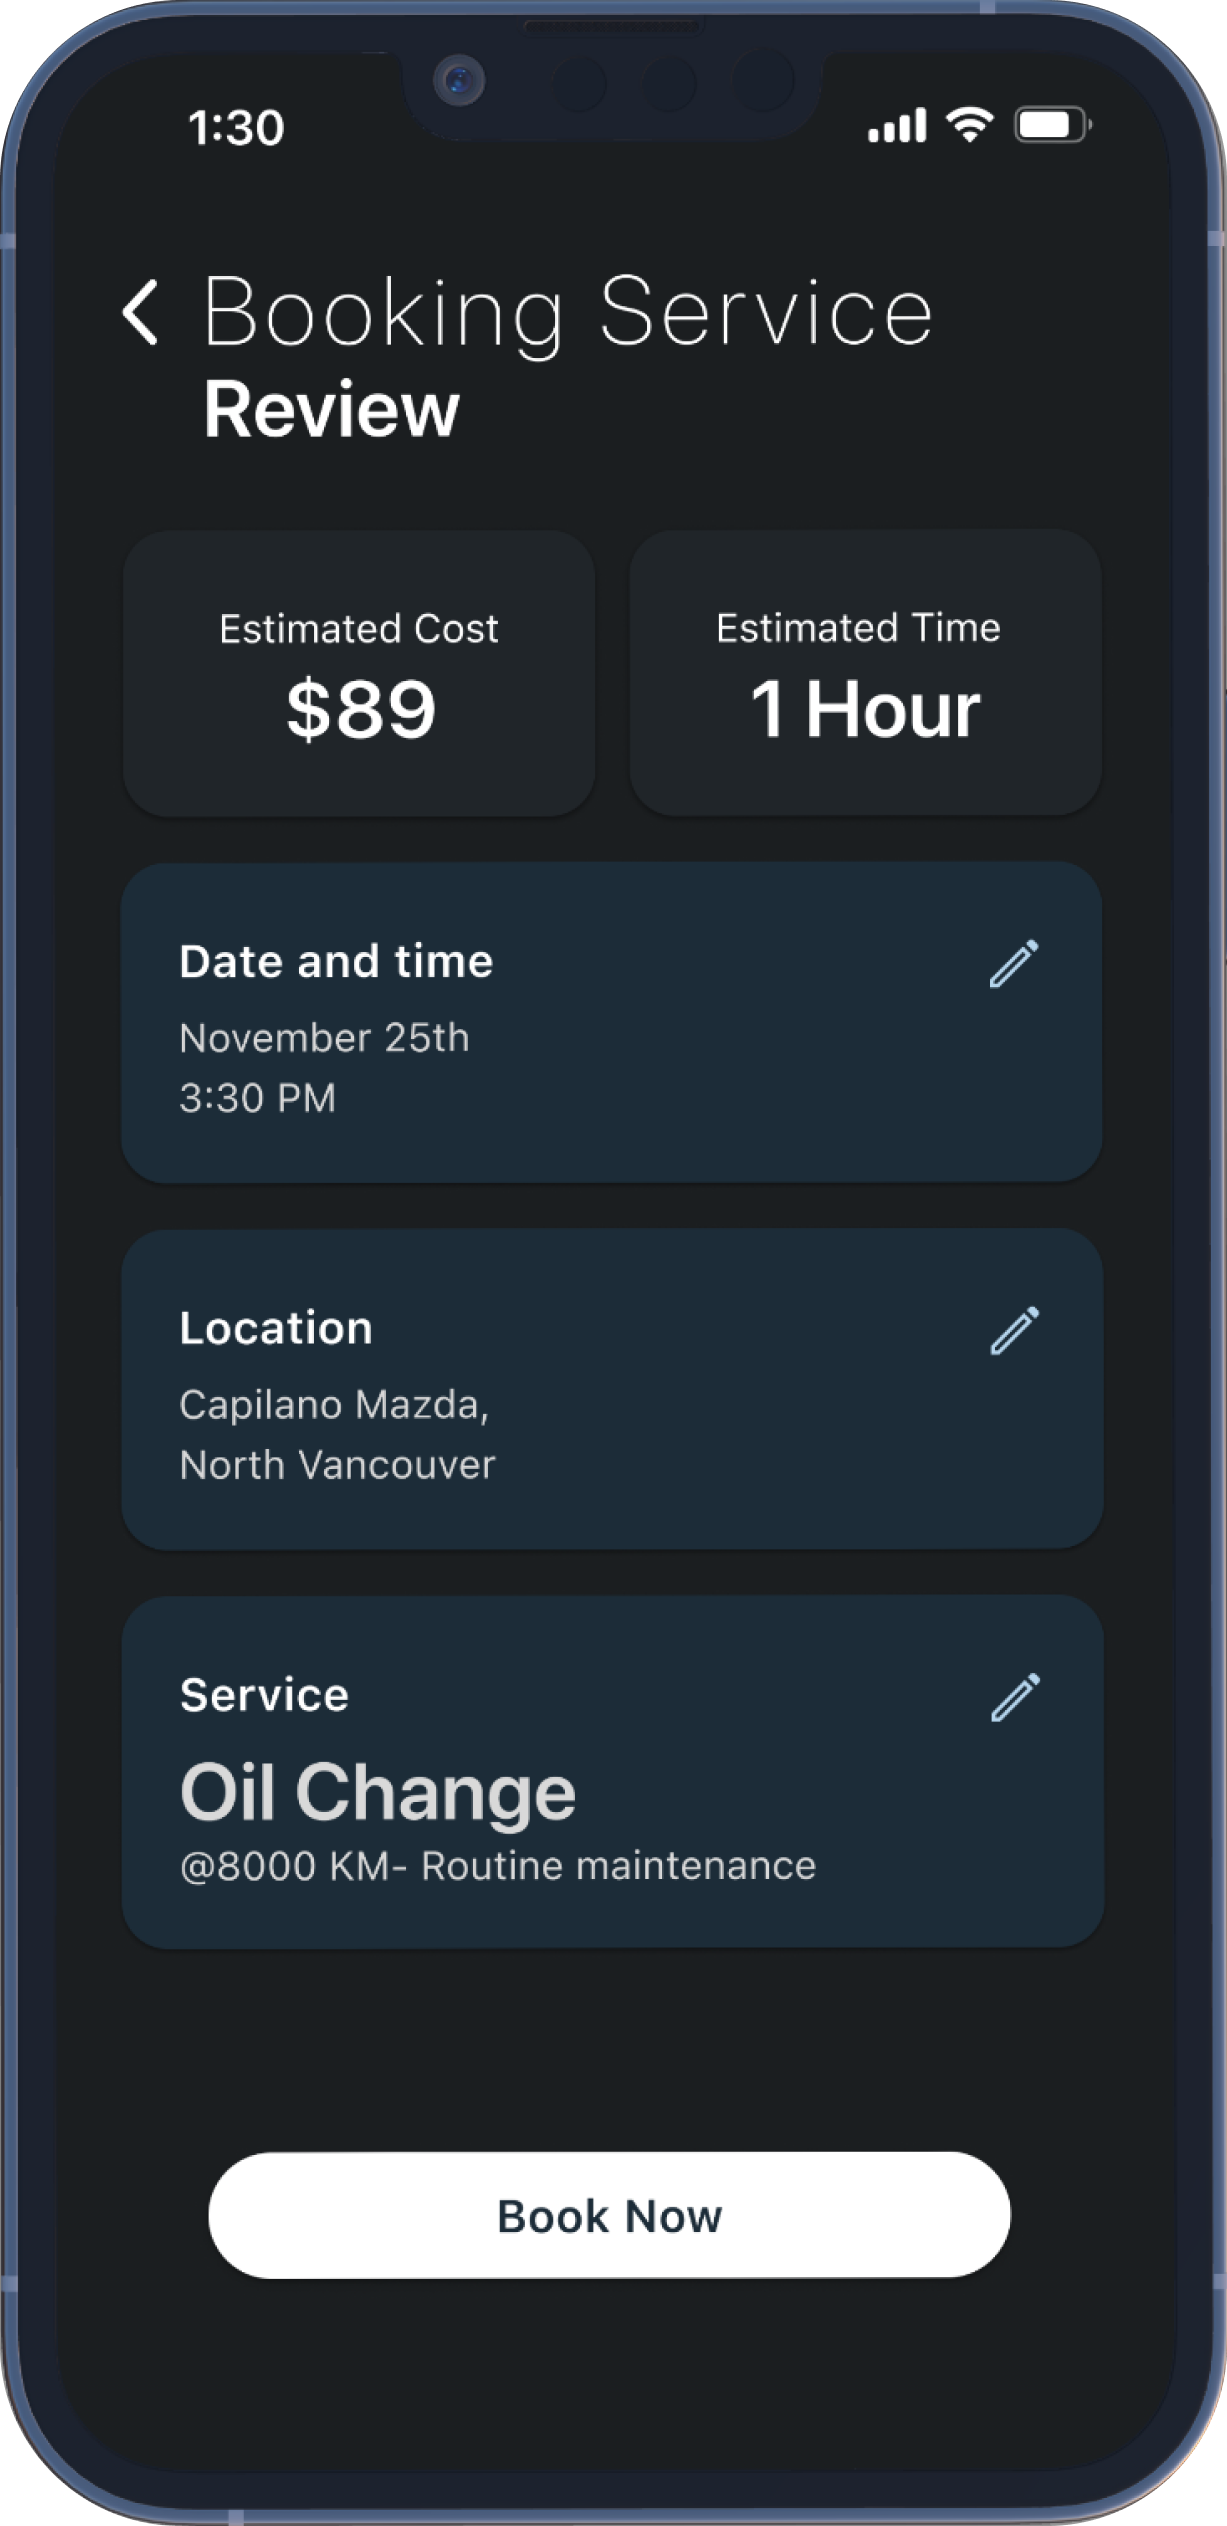 A screenshot of the service booking screen, identifying estimated cost and time